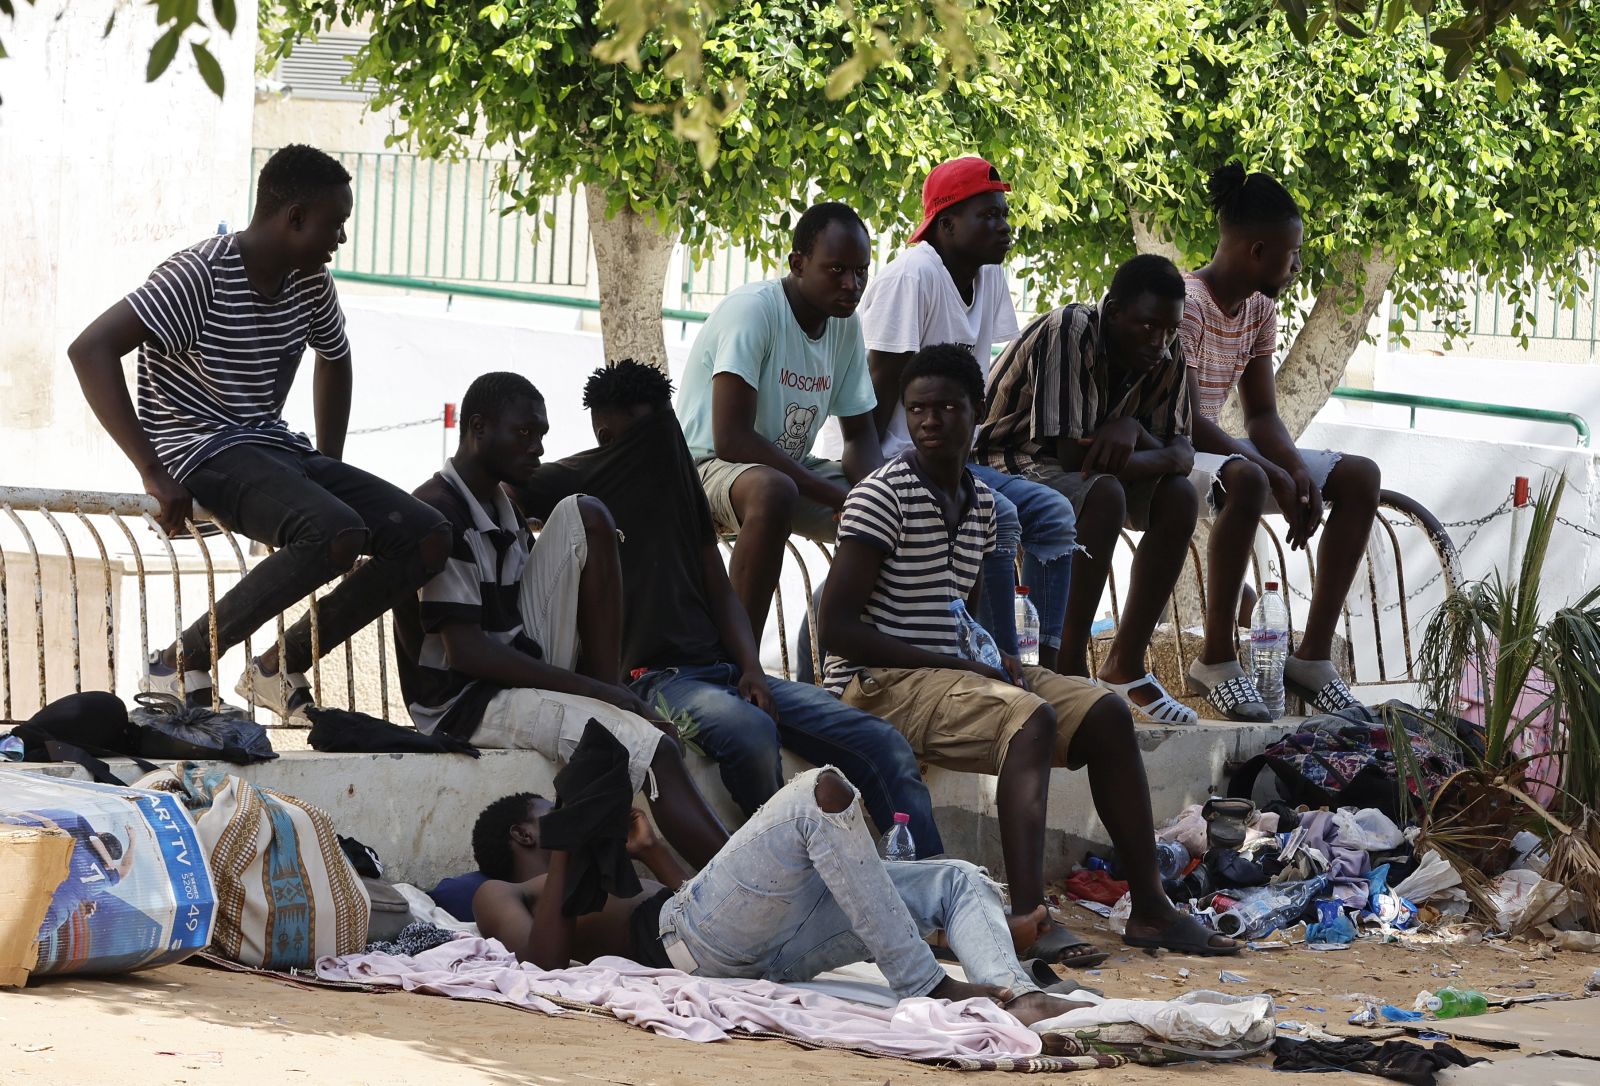 epa10760599 Sub-Saharan African migrants gather in a public garden in Sfax, in the south of Tunis, Tunisia, 21 July 2023. According to the Red Crescent, in Sfax, the second most important city in Tunisia, almost 1.500 Sub-Saharan African migrants, including children, try to find the shadow and water to survive in a public garden for two weeks. Most of them entered Tunisia in an unauthorized way and come from Sudan, Nigeria, Liberia, Mali, Burkina Faso and Guinea. According to the nongovernmental group Tunisian Forum for Economic and Social Rights (FTDES), between January and May 2023, Tunisian authorities arrested over 3,500 migrants for 'irregular stay' and intercepted over 23,000 people attempting irregular departures from Tunisia.  EPA/MOHAMED MESSARA